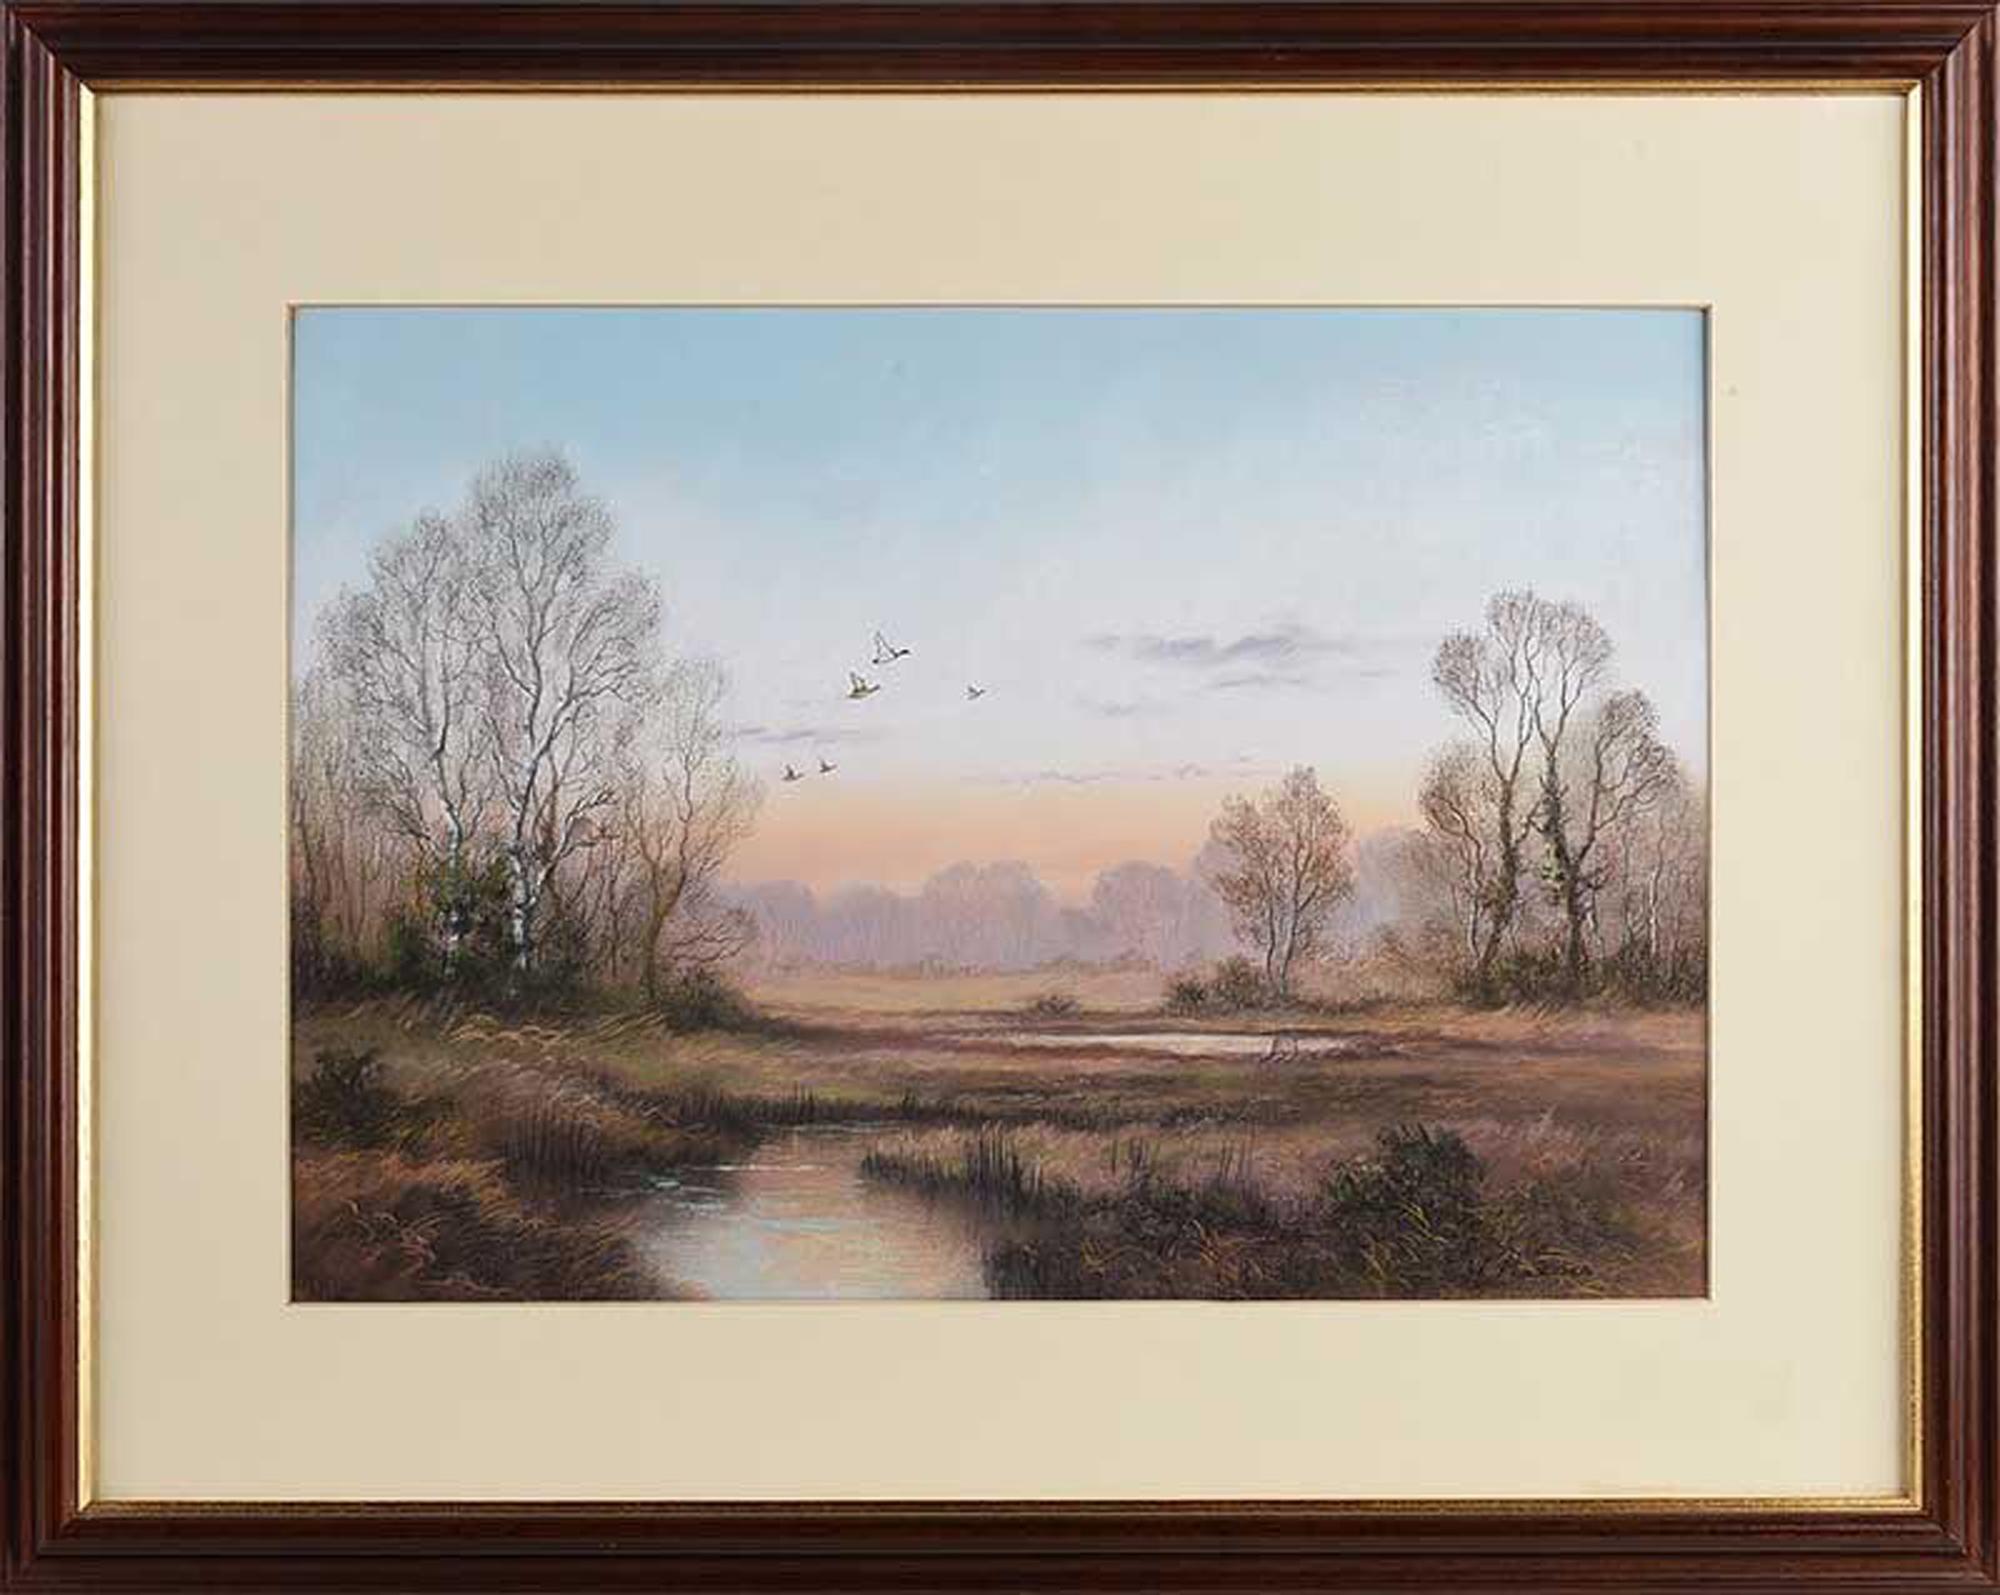 Wendy Reeves Animal Art - Mallards over Wetlands in the English Countryside by 20th Century British Artist